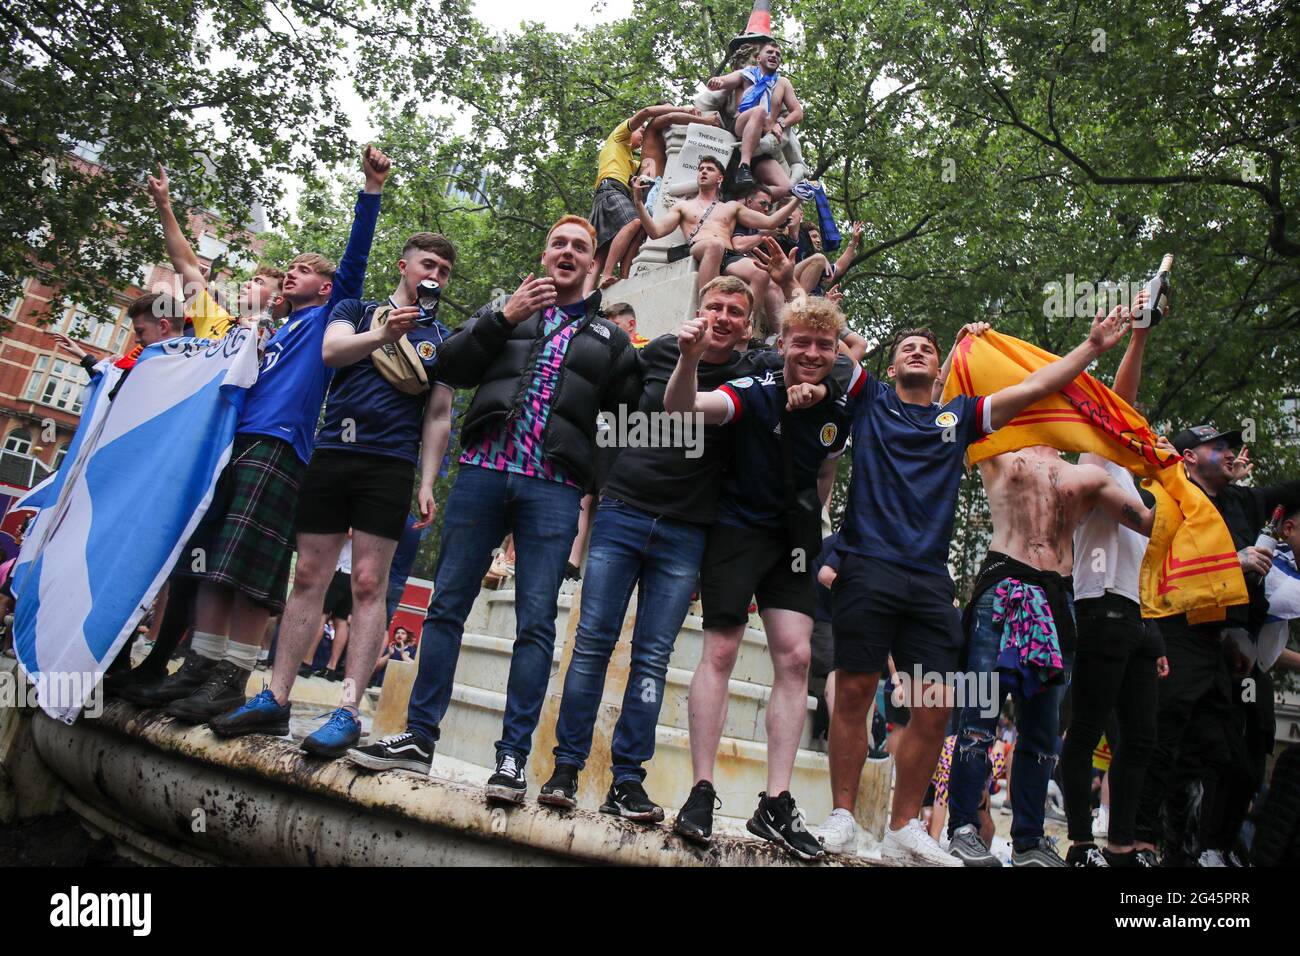 London, UK . 18th June, 2021. Scotland fans 'The Tartan Army' party in Leicester Square before England VS Scotland Football Match at Wembley Stadium Credit: Lucy North/Alamy Live News Stock Photo